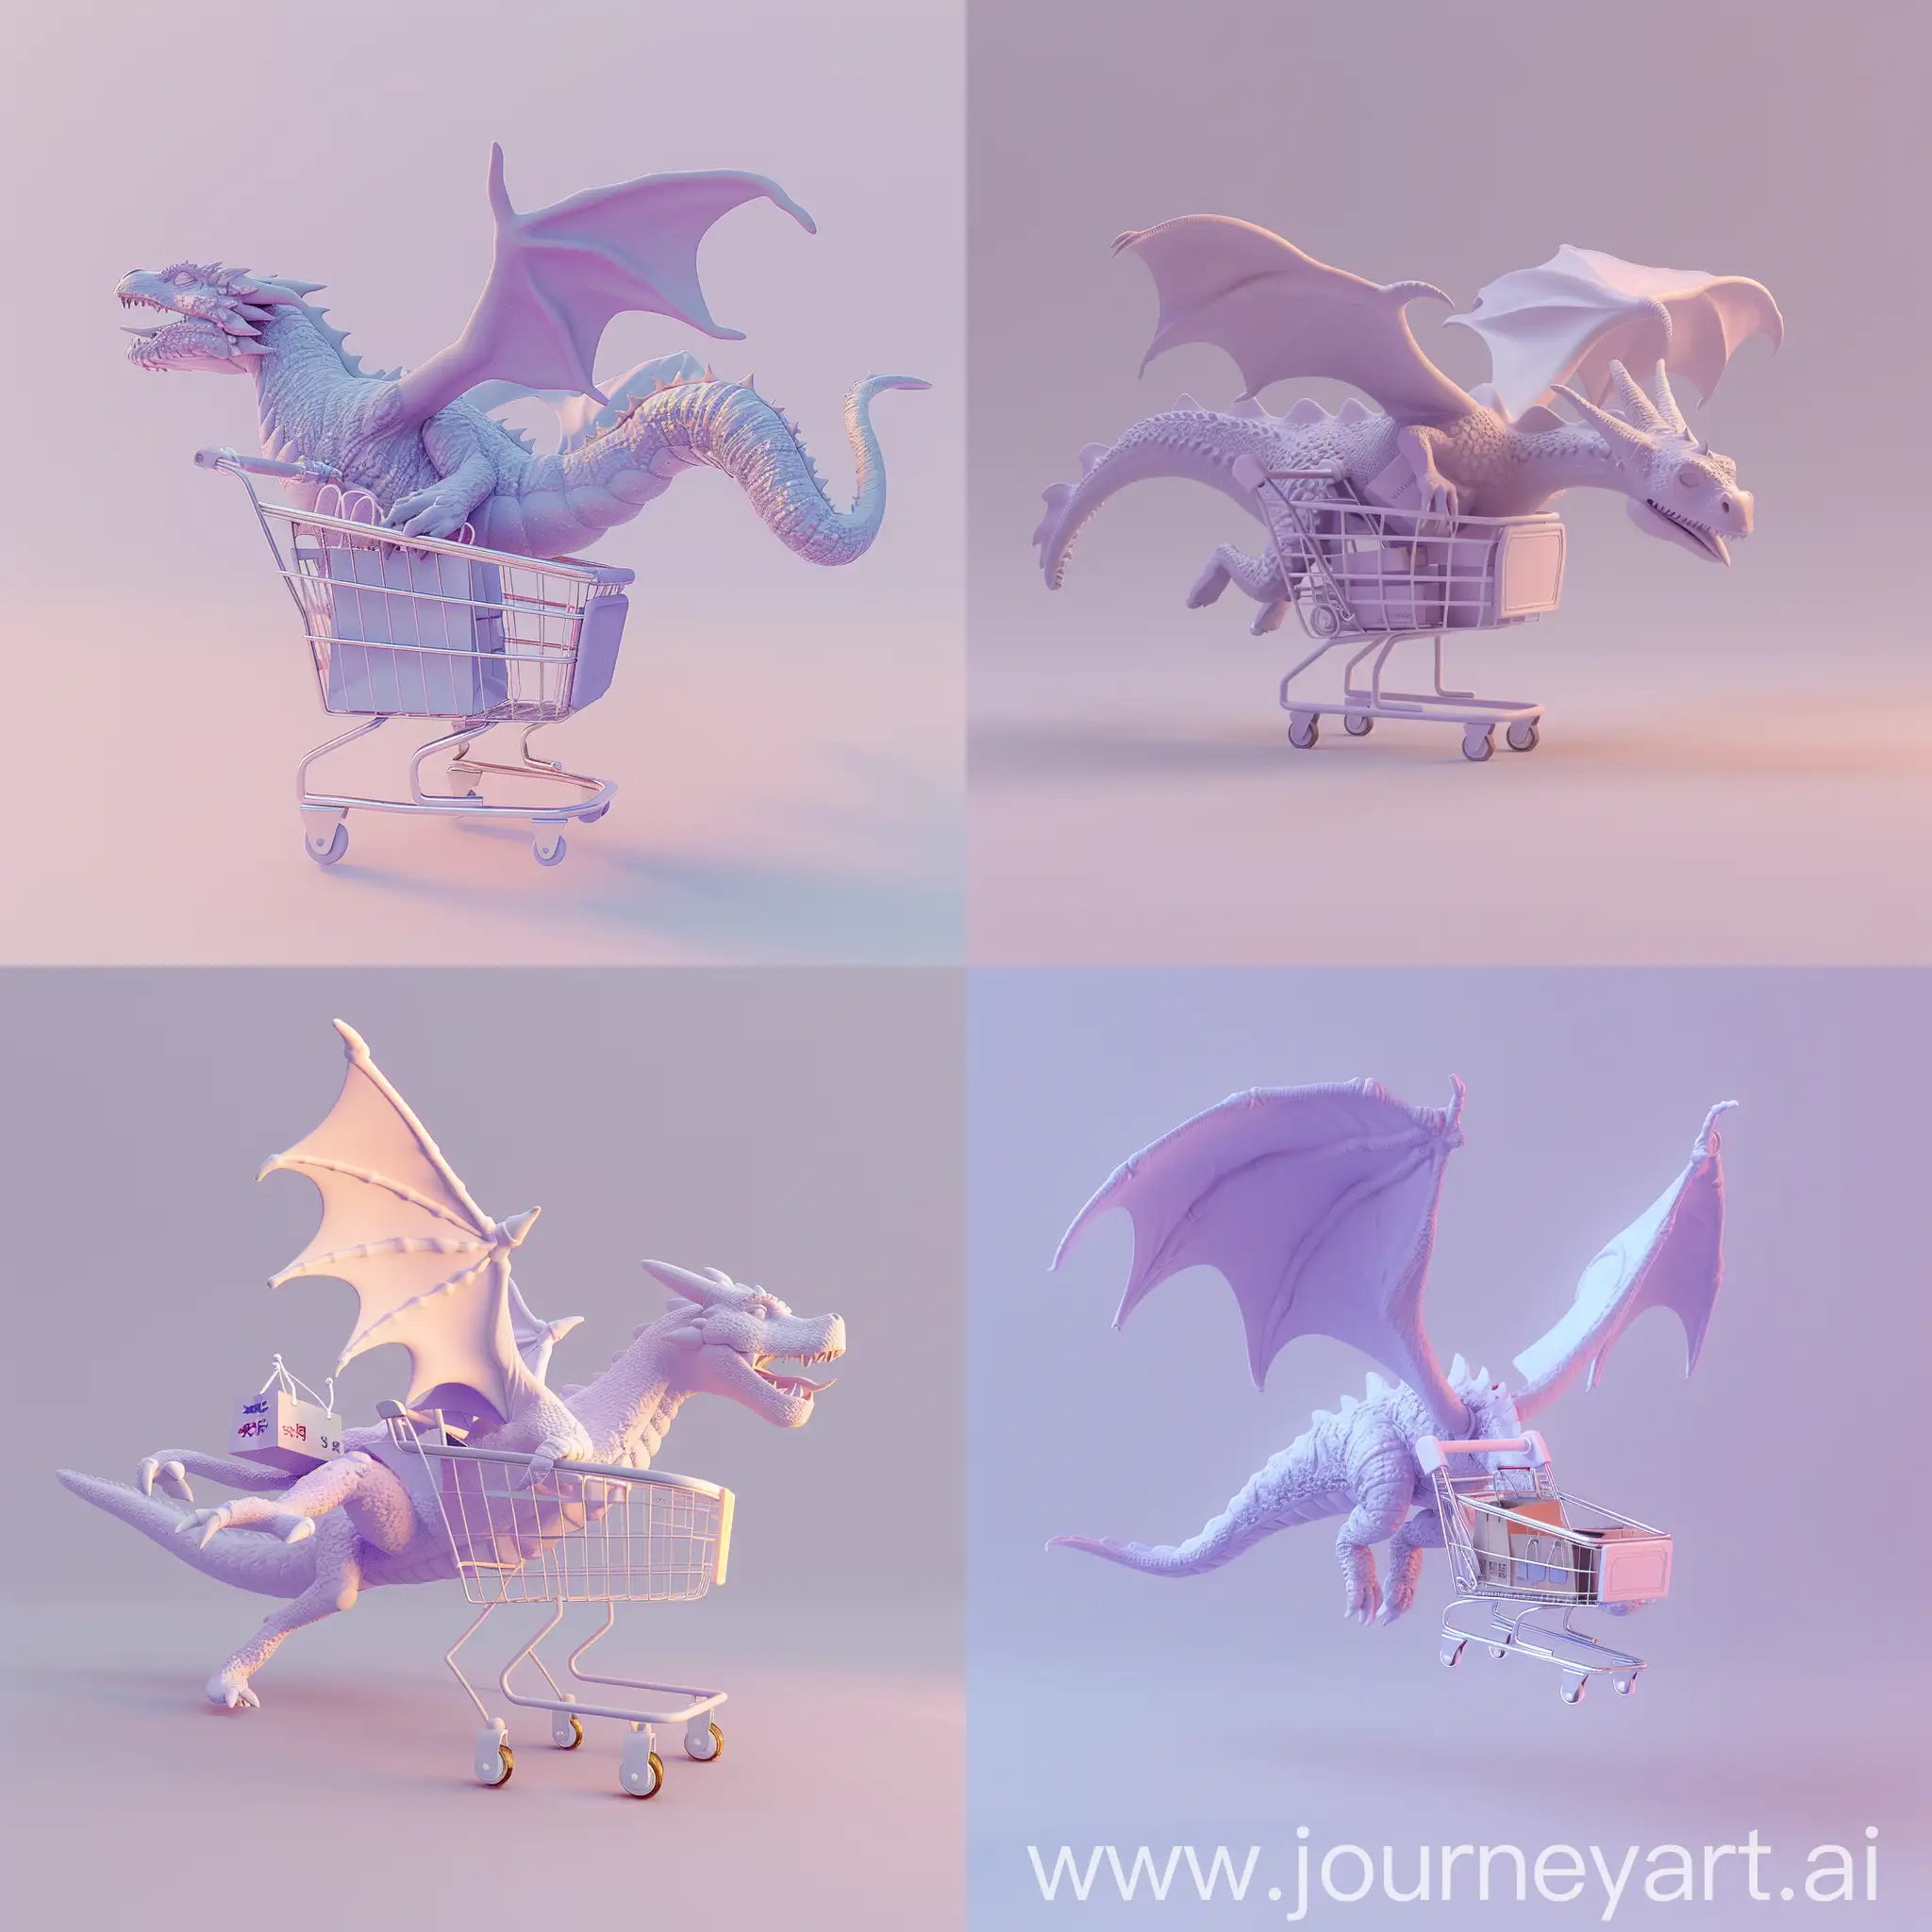 Dragon-Carrying-Shopping-Cart-in-Dreamy-Light-Purple-Background